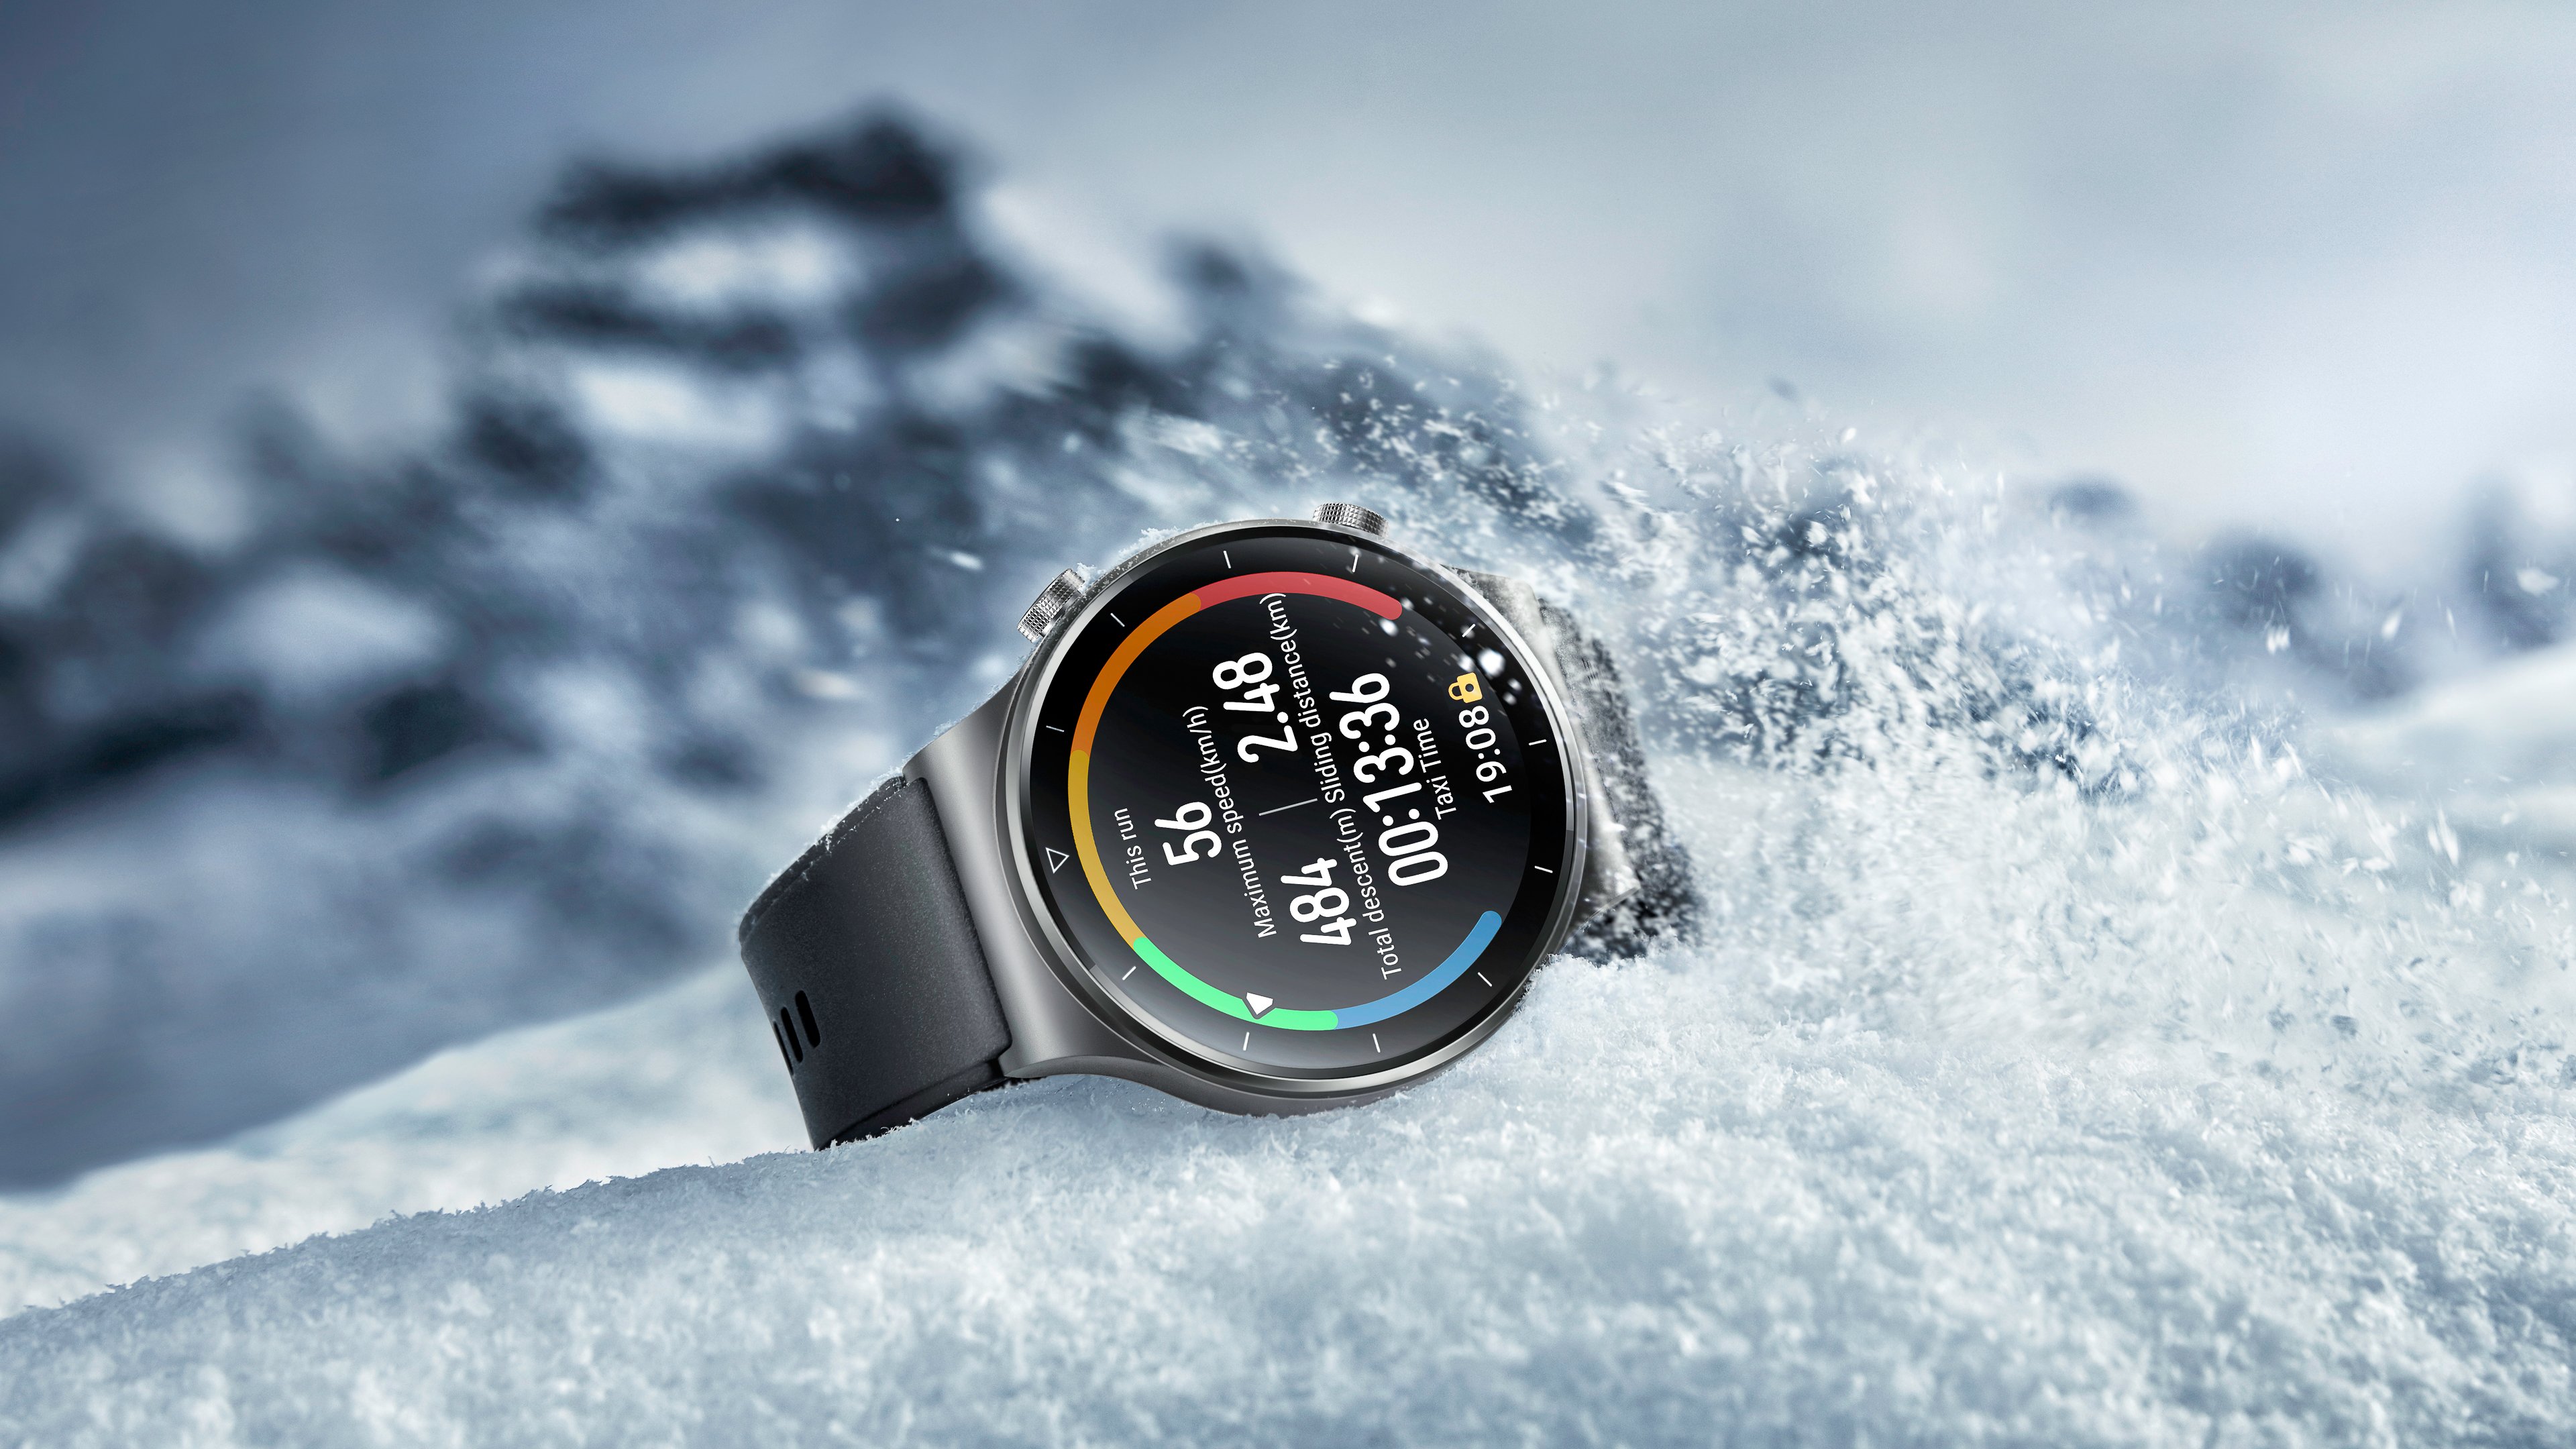 Envío maleta Extensamente Huawei introduces new Watch GT 2 Pro and Watch Fit smartwatches | nextpit